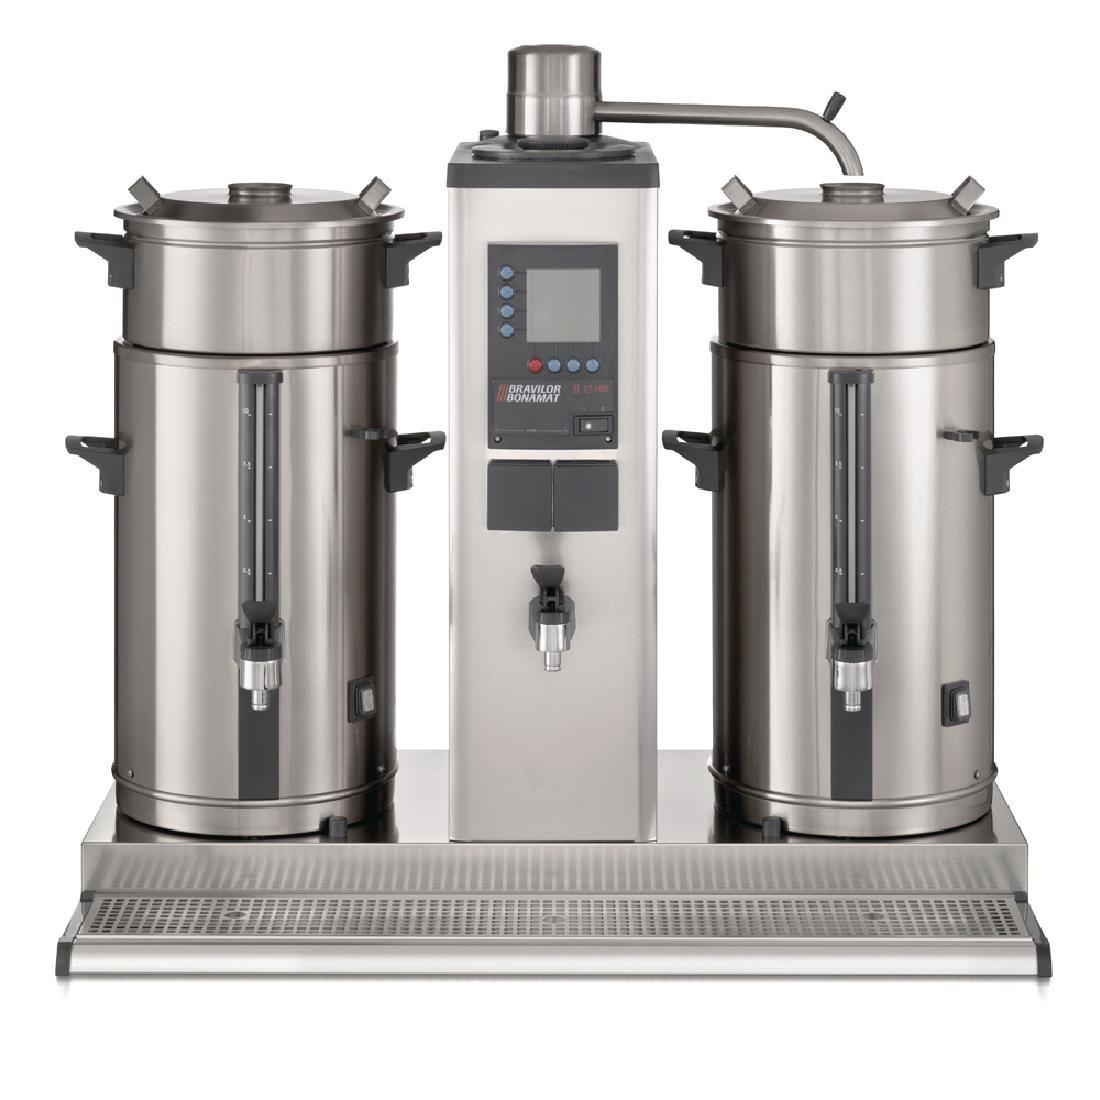 Bravilor B10 HW5 Bulk Coffee Brewer with 2x10Ltr Coffee Urns and Hot Water Tap 3 Phase - DC690-3P50  - 2